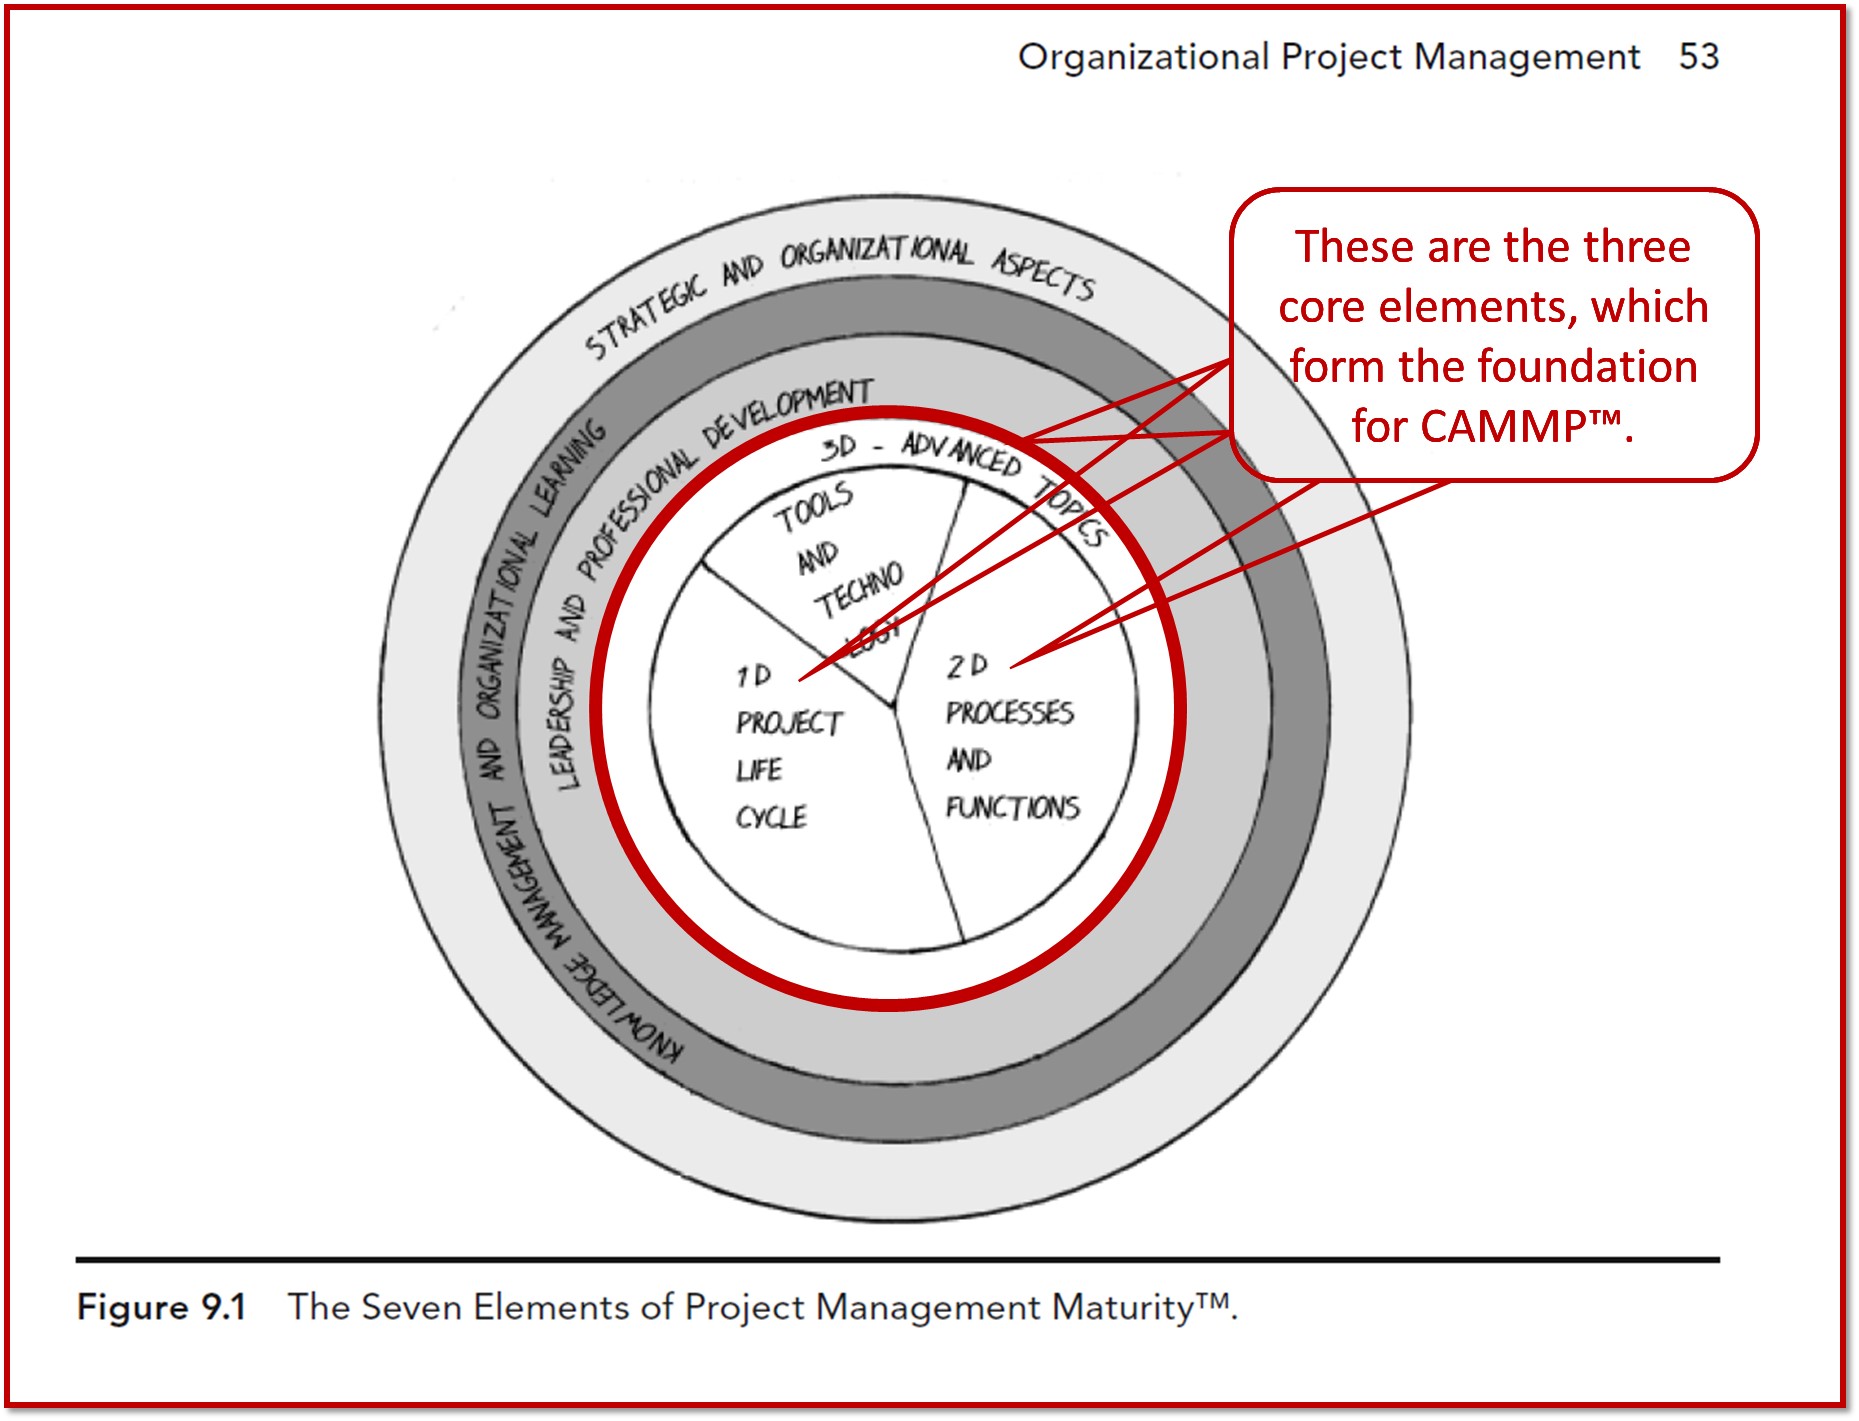 Why organizations need OPMS to manage projects?